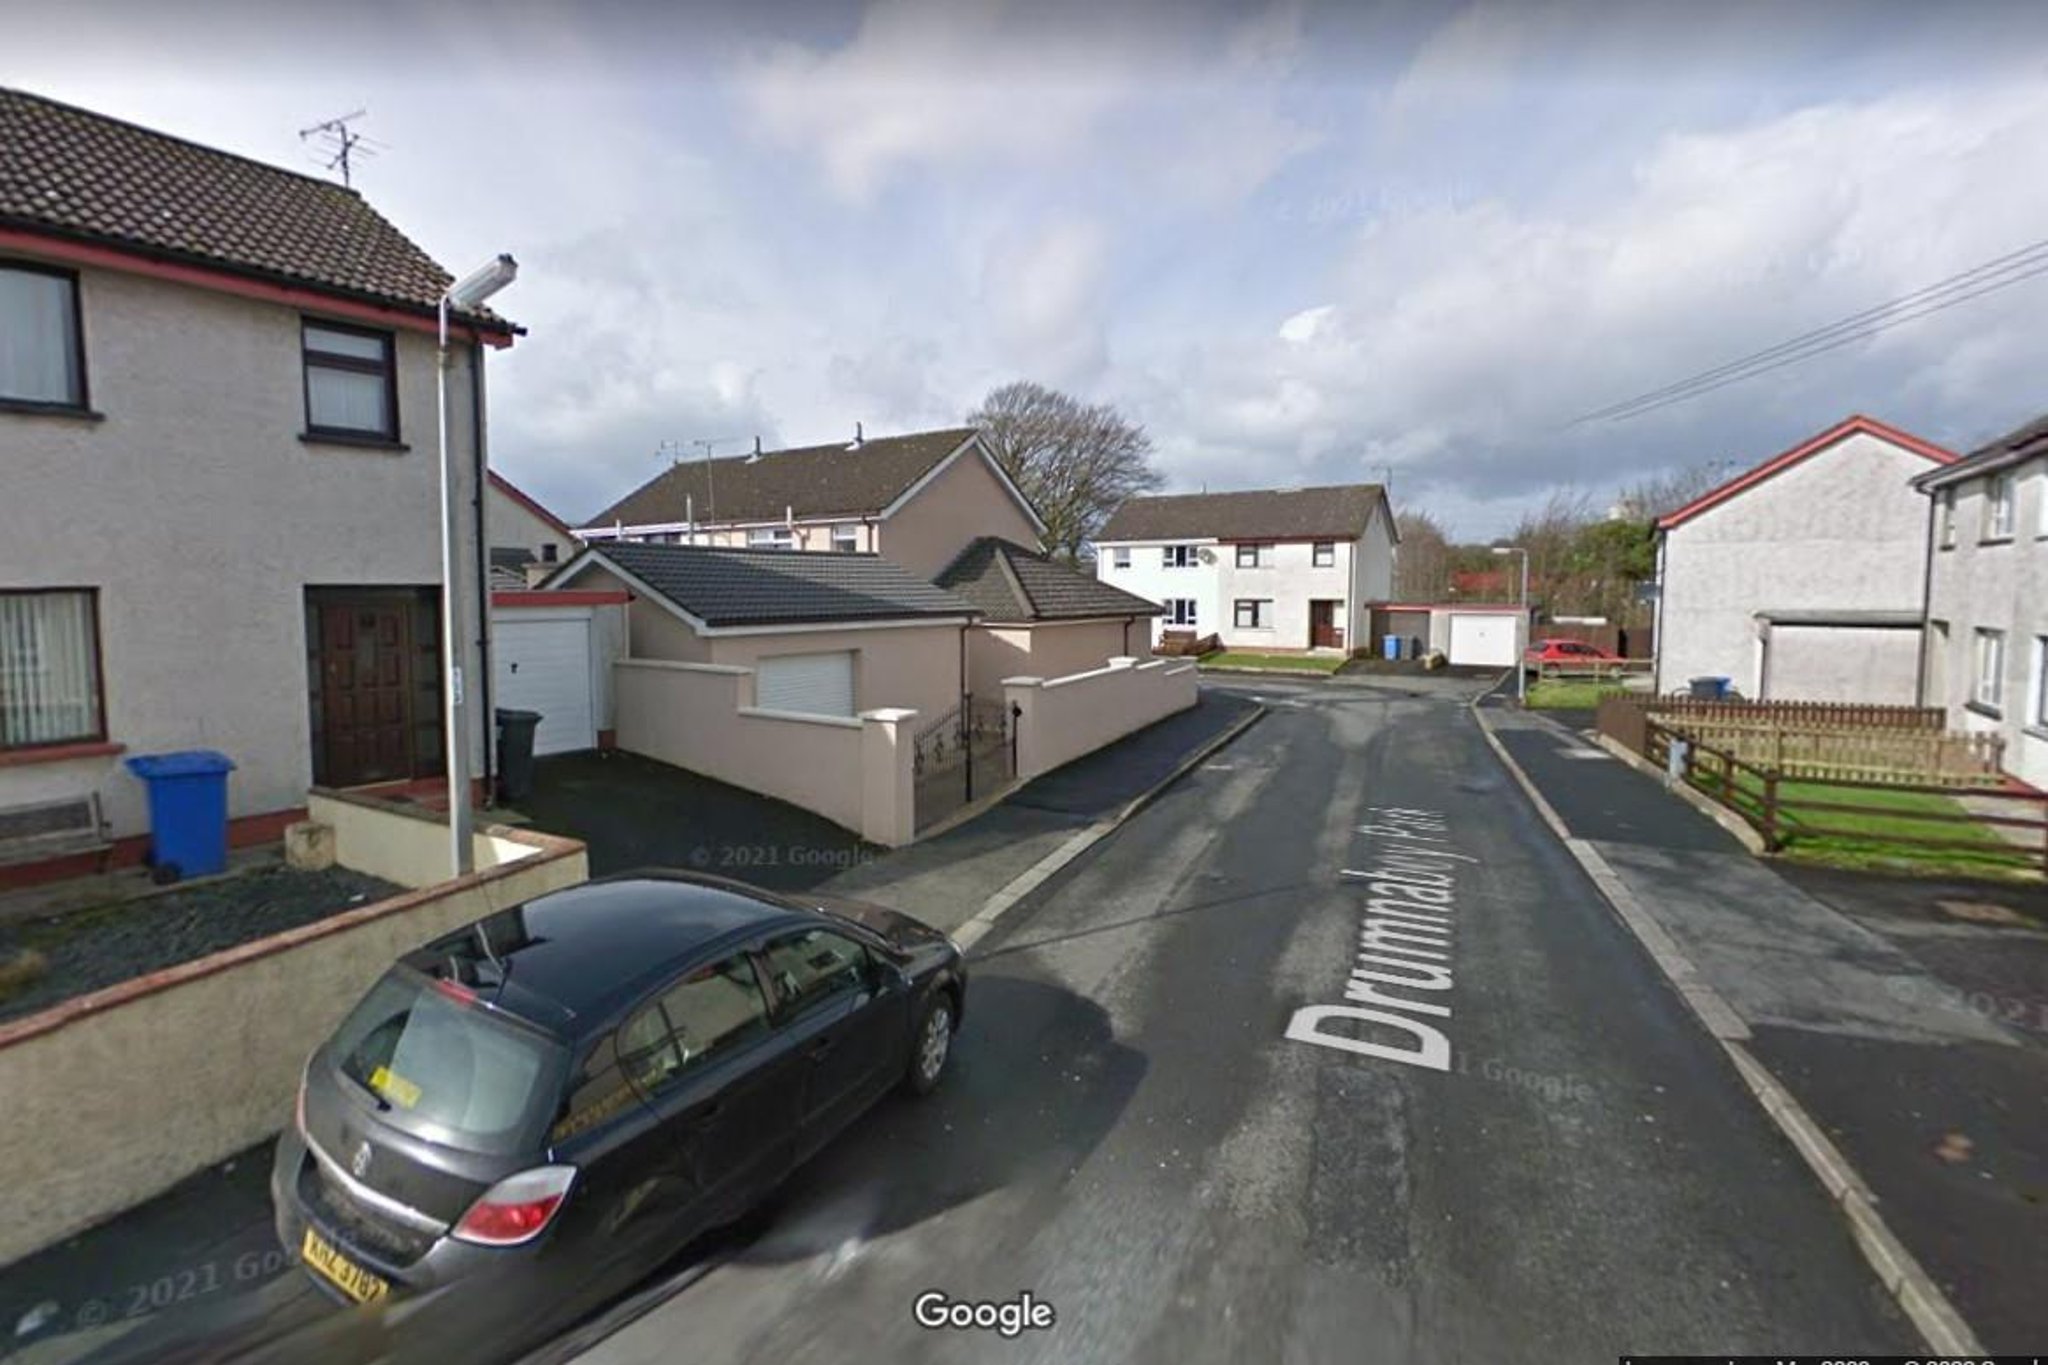 Victim sustains fractured leg after four masked and armed men force way into his home